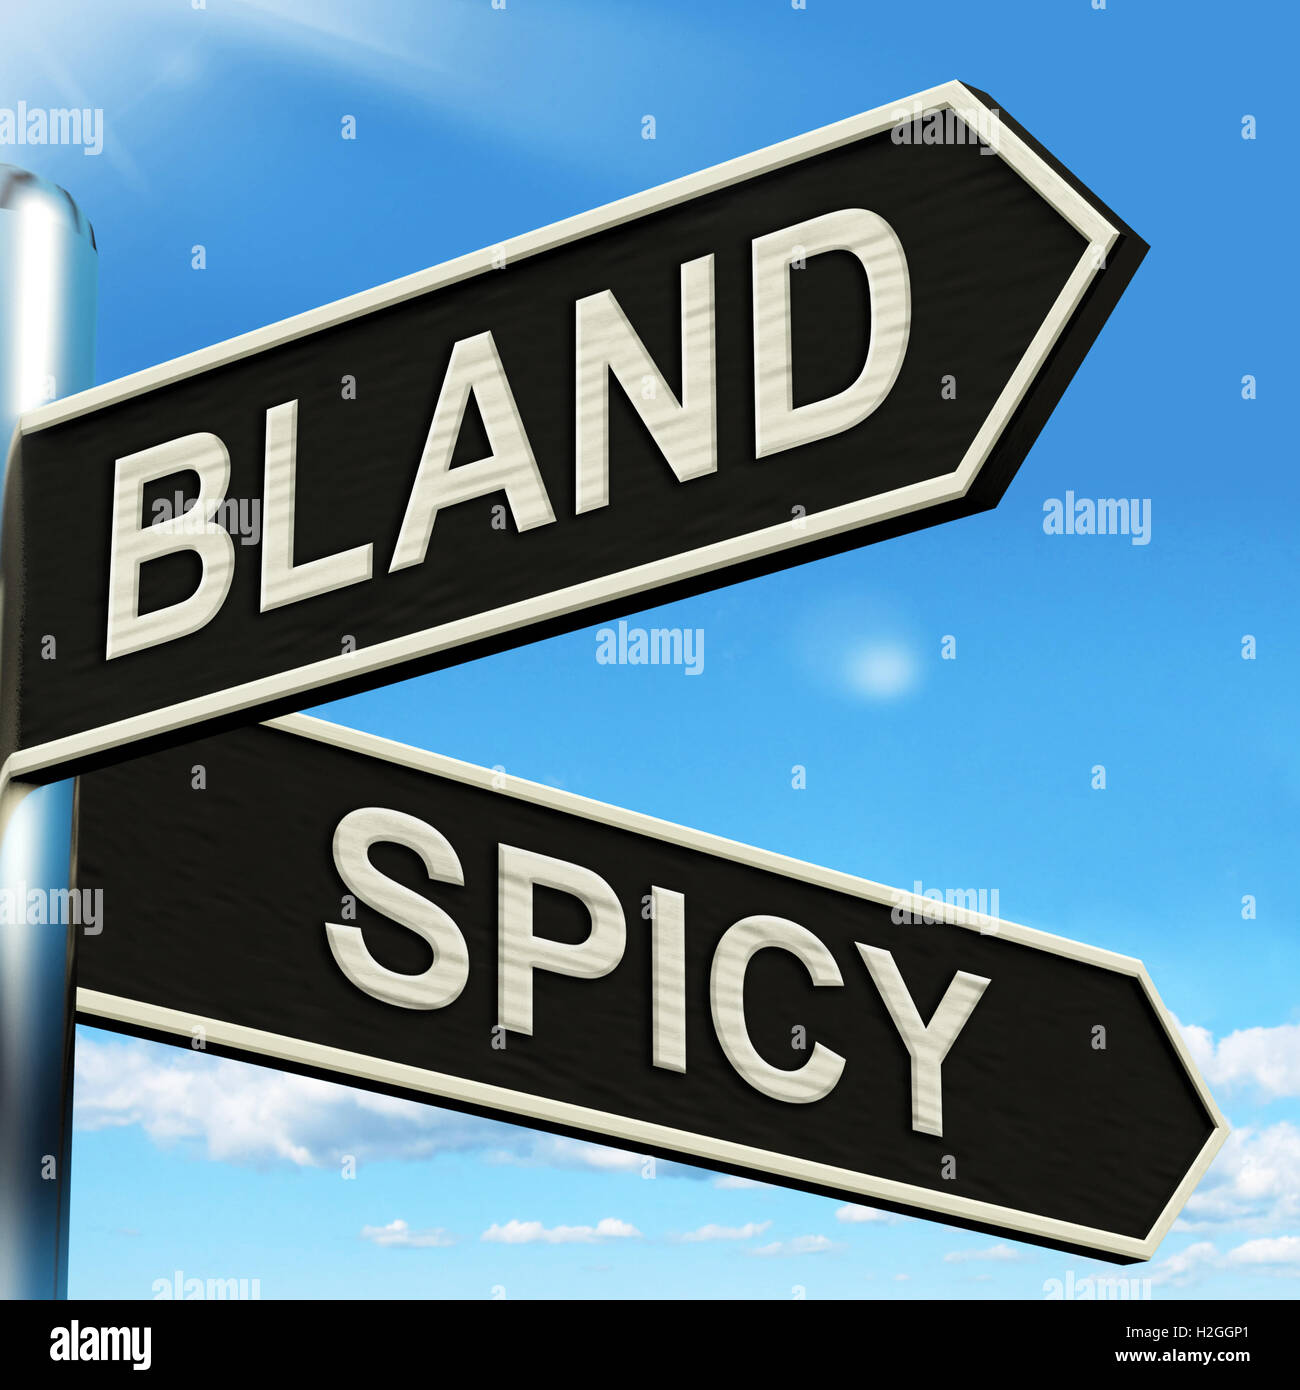 Bland Spicy Signpost Means Tasteless Or Hot Stock Photo